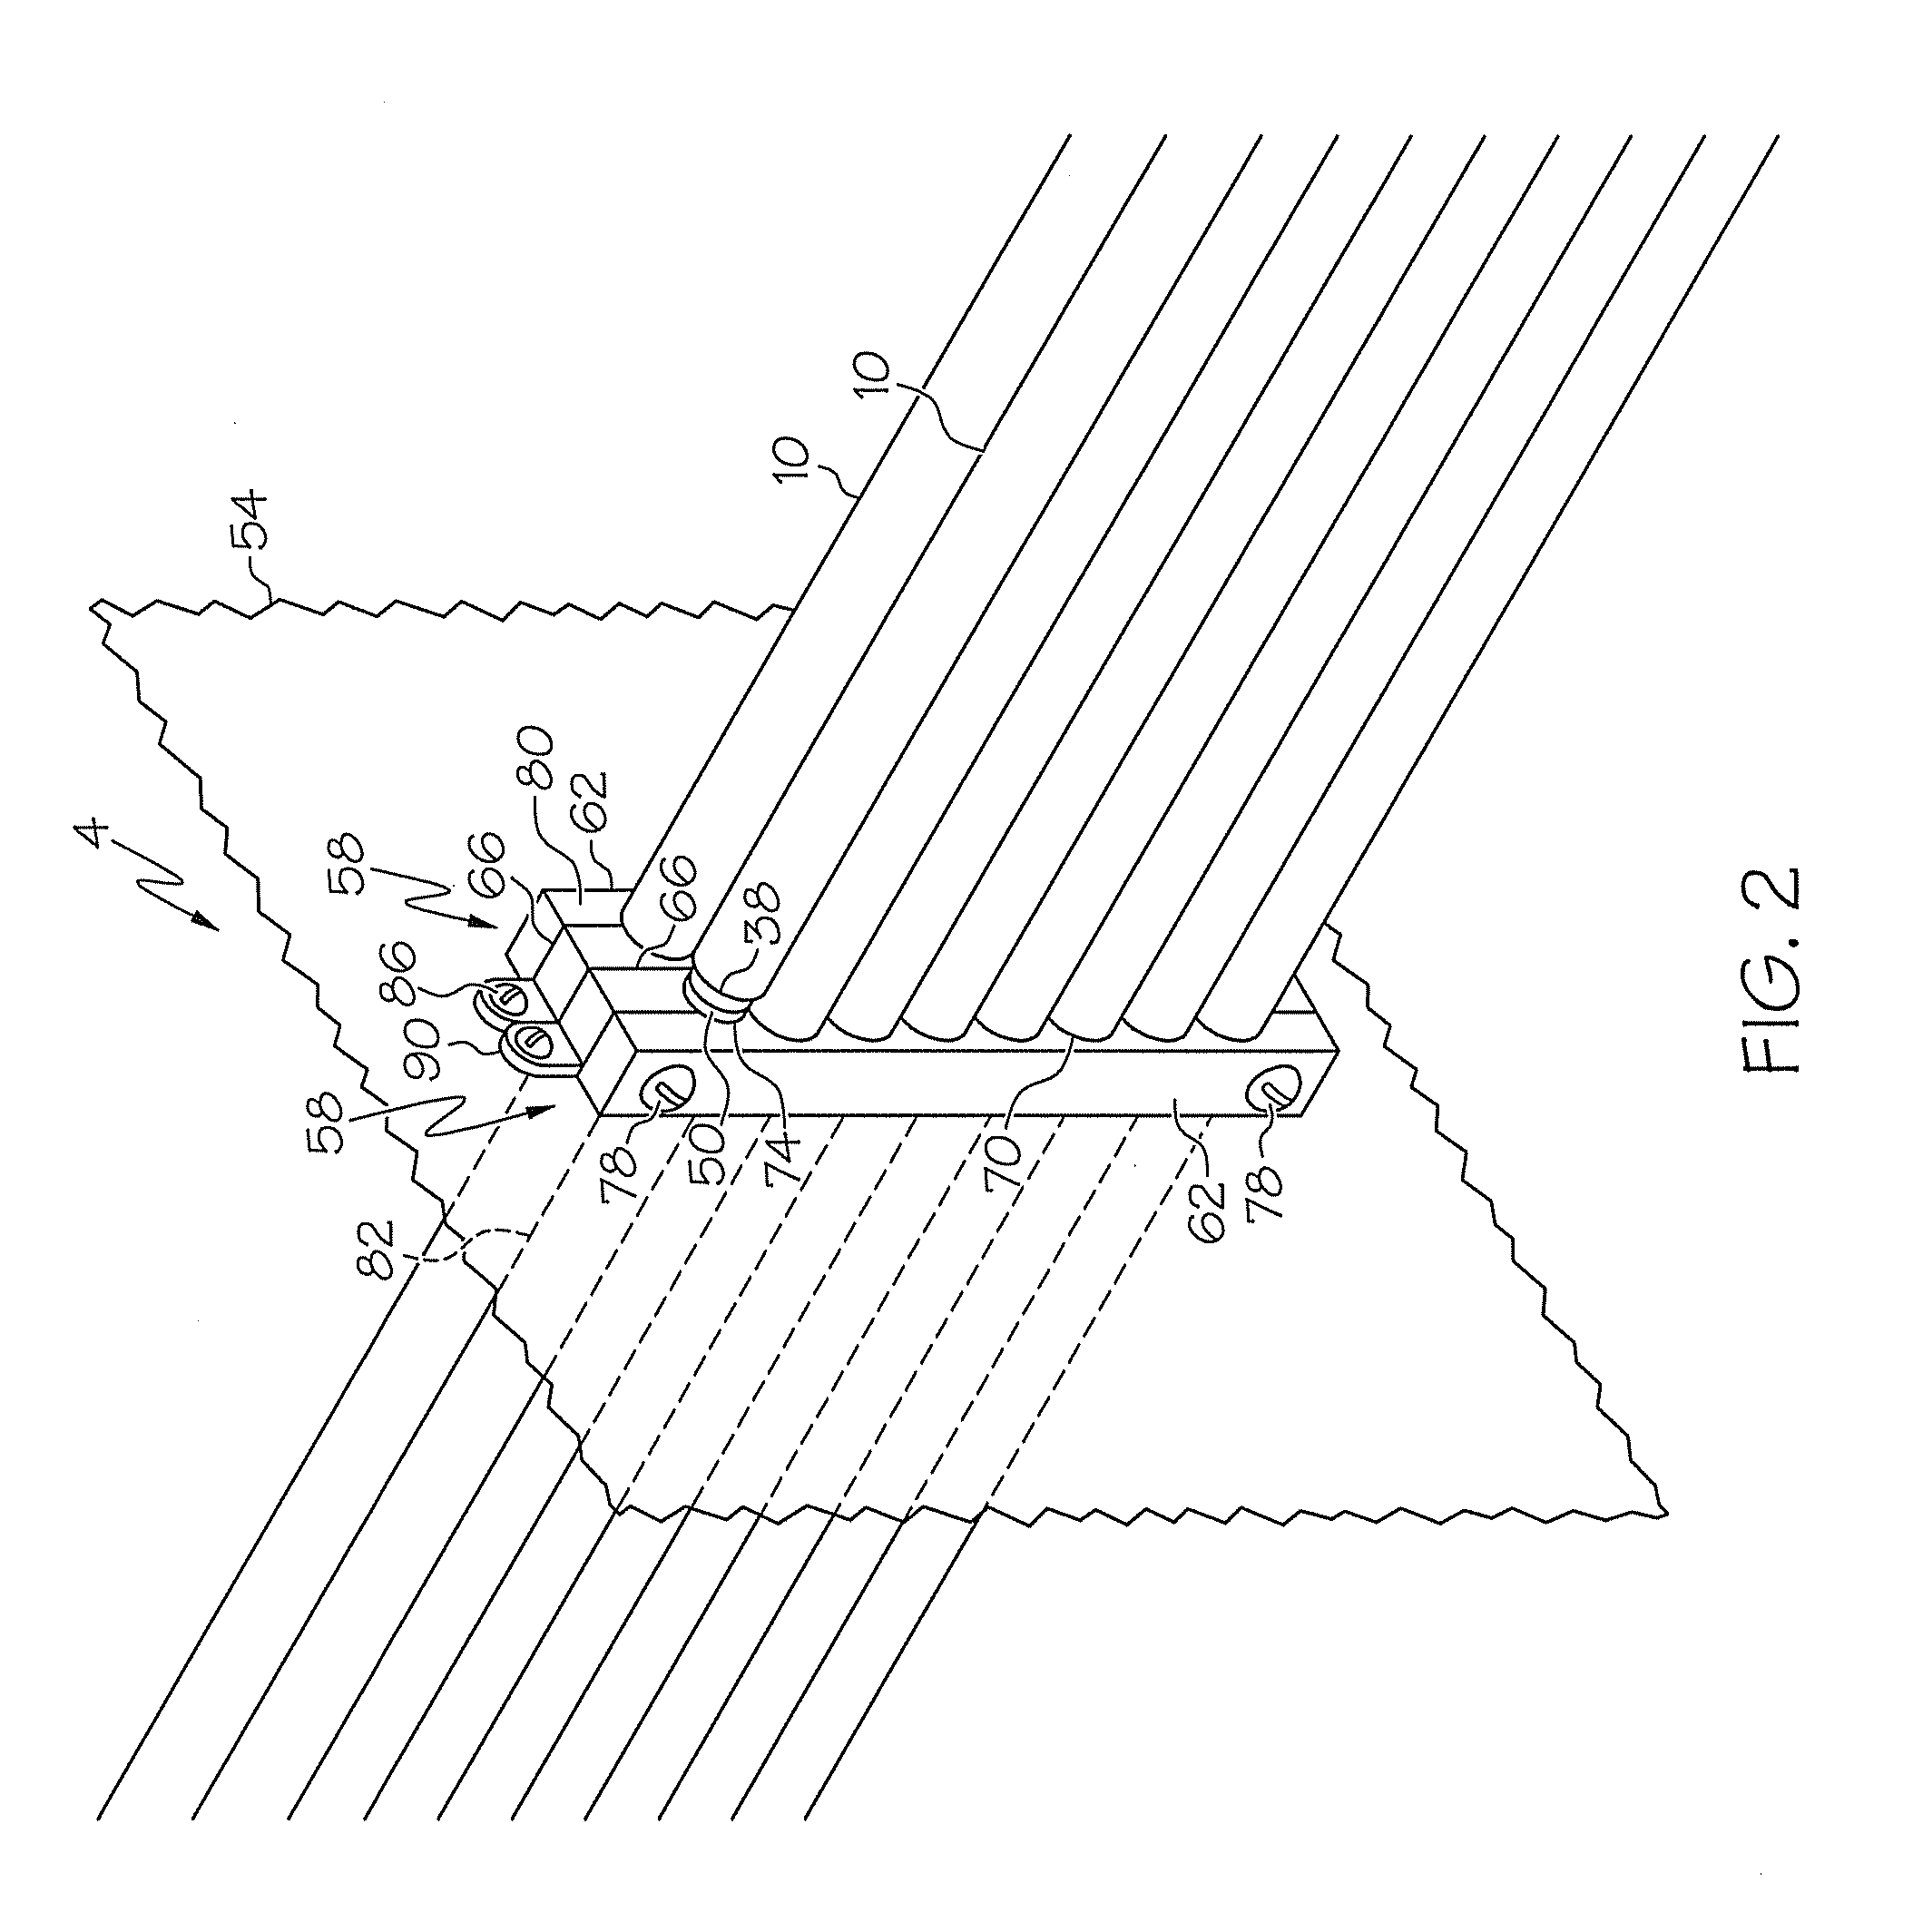 Method and system of feeding cable through an enclosure while maintaining electrognetic shielding